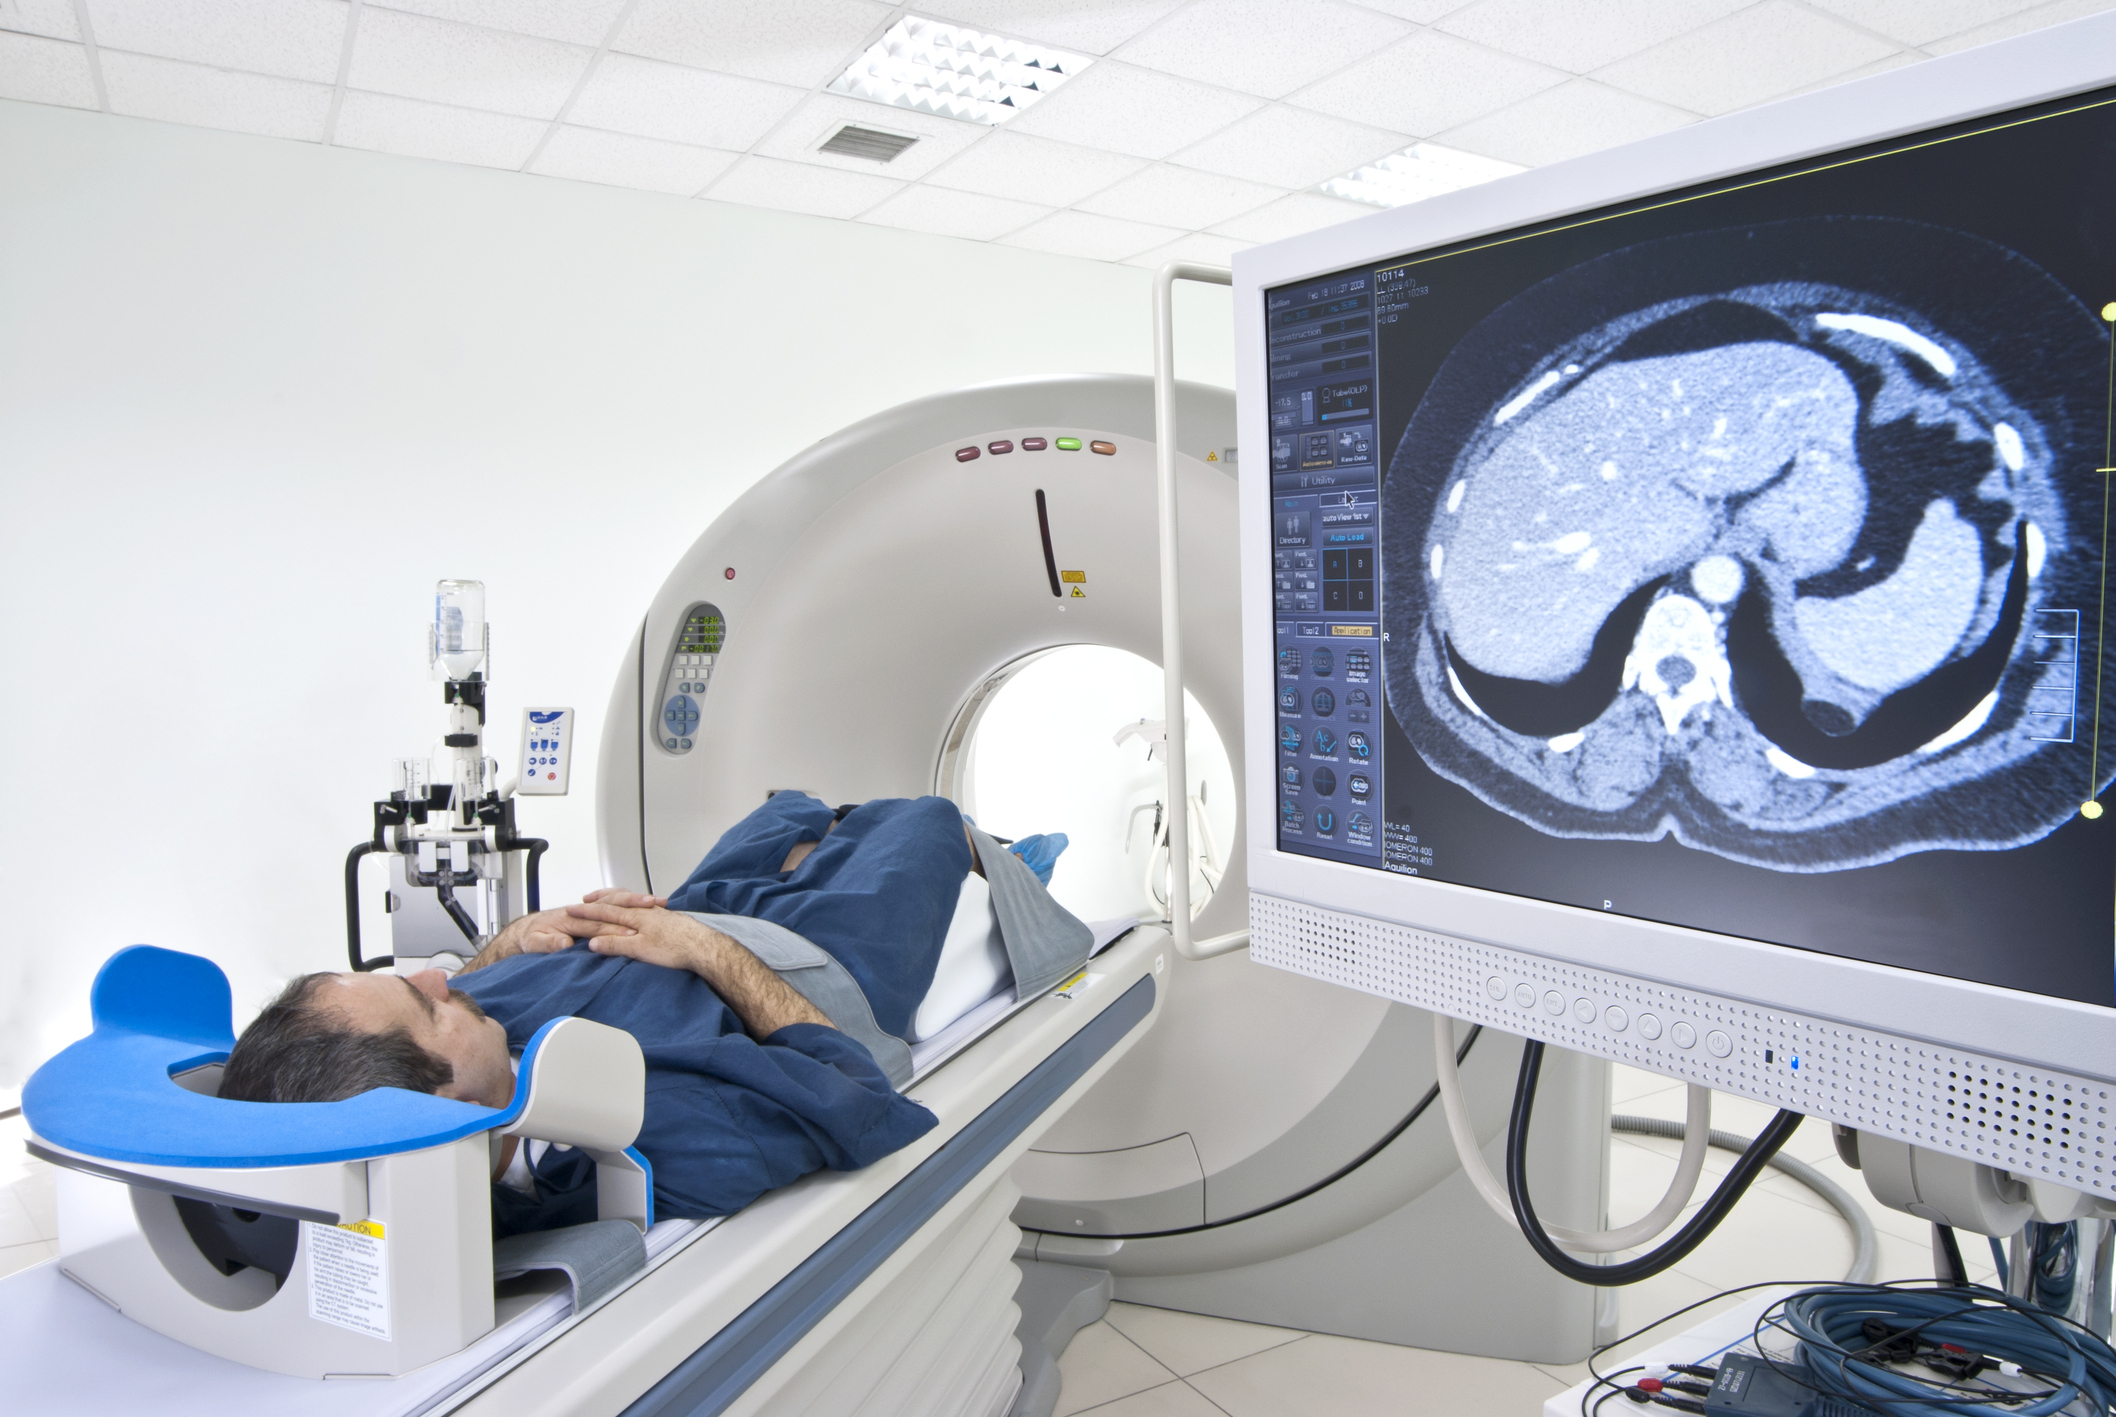 Computed Tomography Ct Scan Market (2020-2027) | Growth Analysis By Siemens (Germany), GE Healthcare (UK), Toshiba (Japan), Hitachi (Japan)